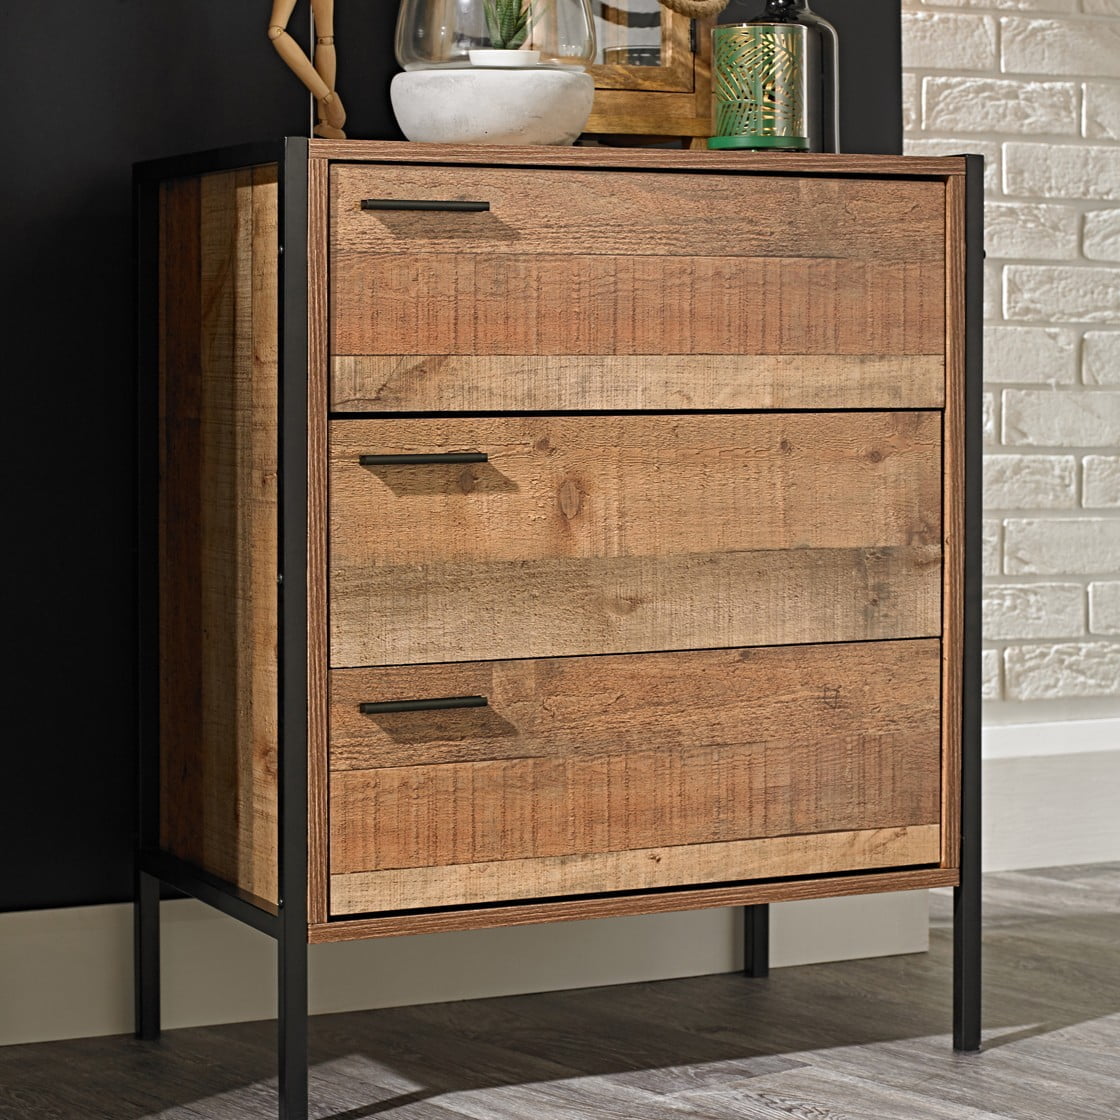 HOXTON 3 DRAWER CHEST DISTRESSED OAK EFFECT